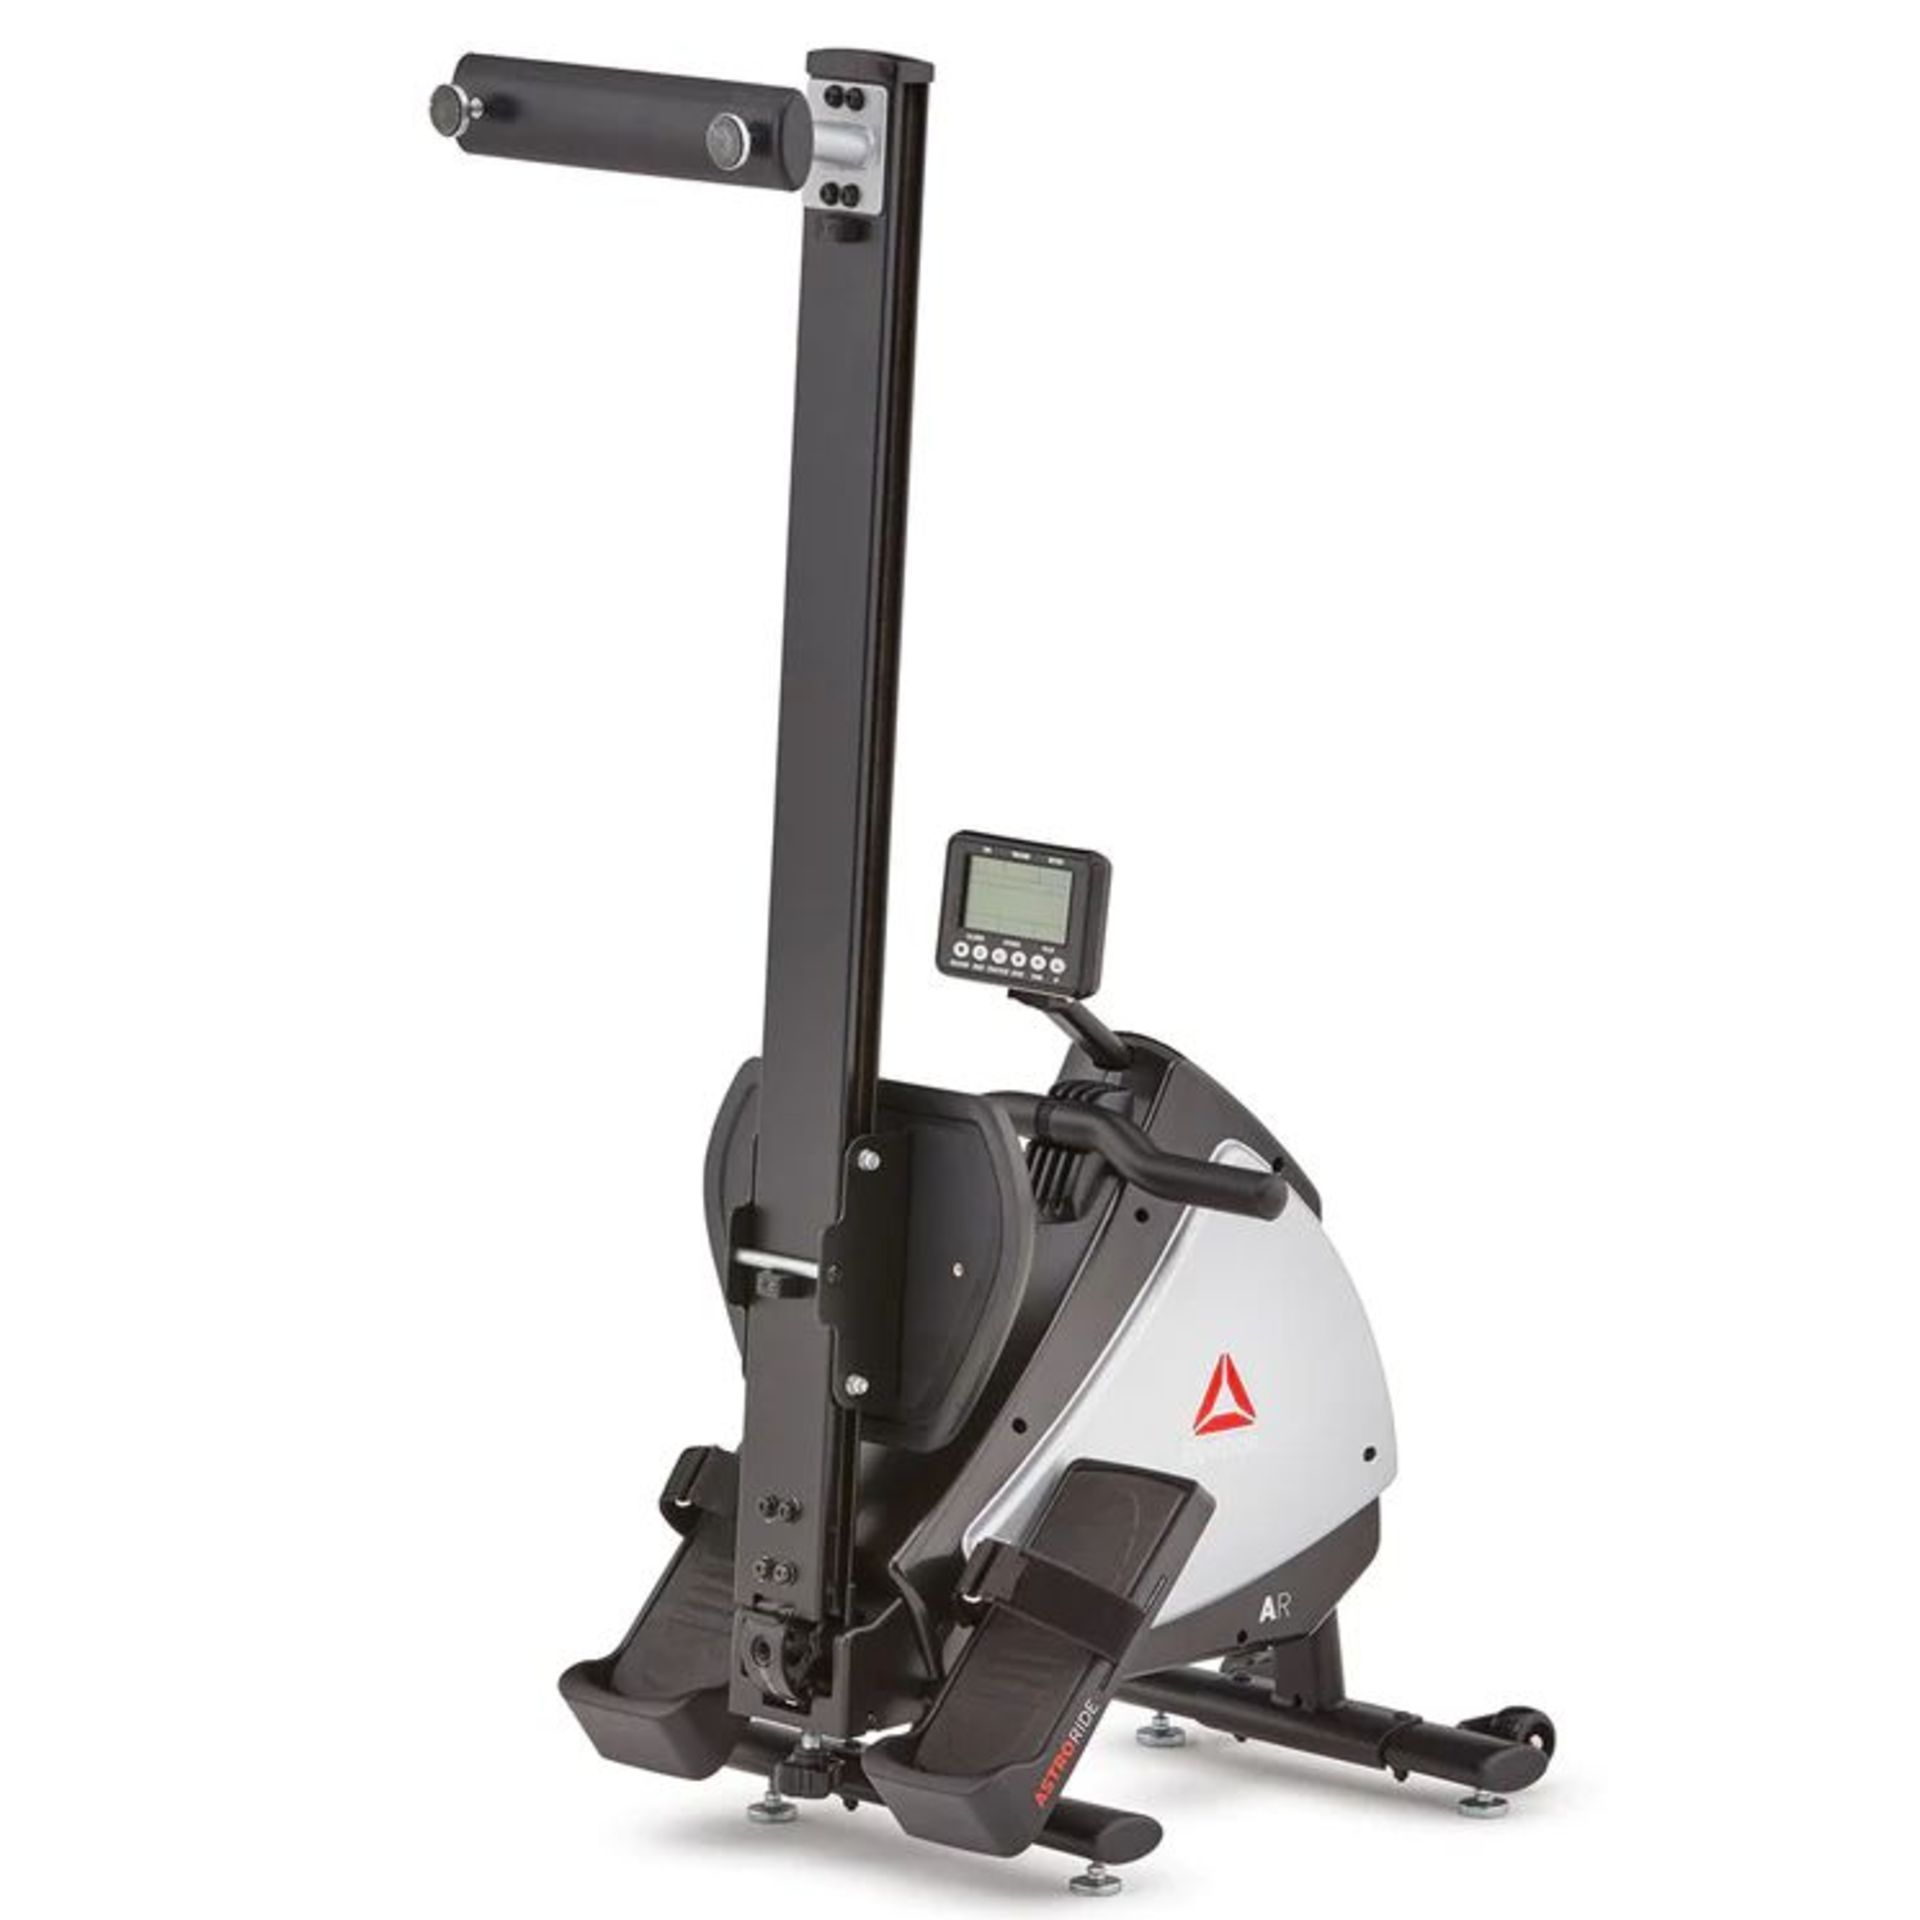 BRAND NEW REEBOK AR Rower. RRP £514.99 EACH. Designed for you to create more effective and - Image 2 of 4